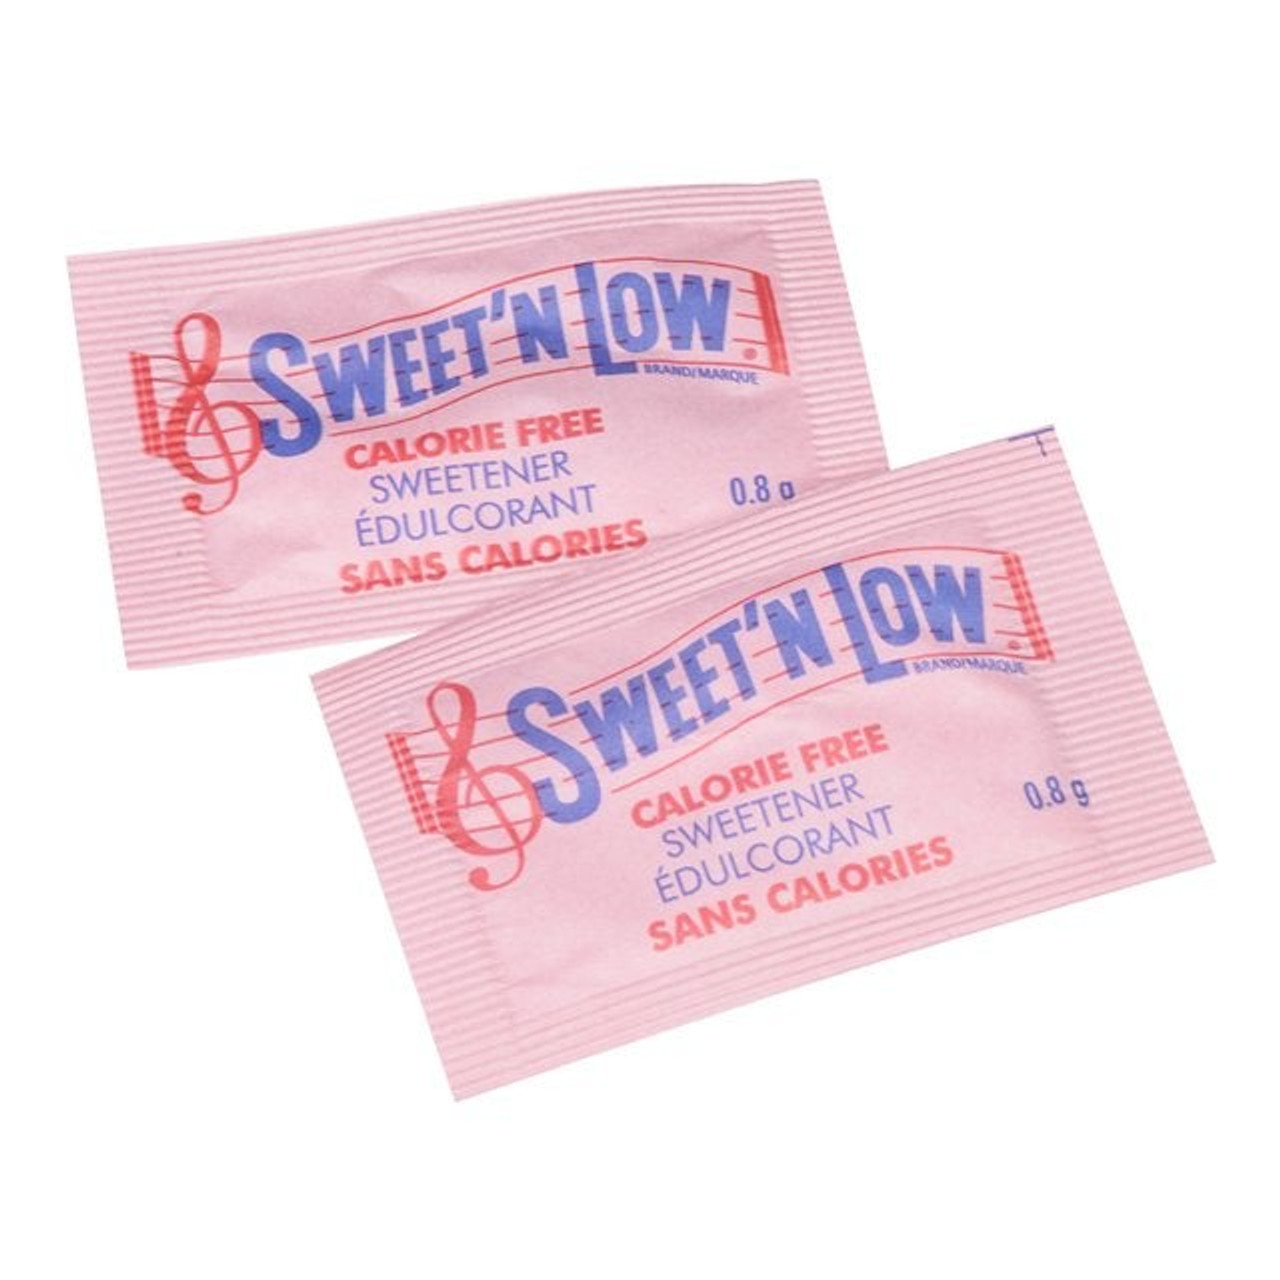 Sweet N Low Sweetener, With Cyclamate | 1000UN/Unit, 3 Units/Case